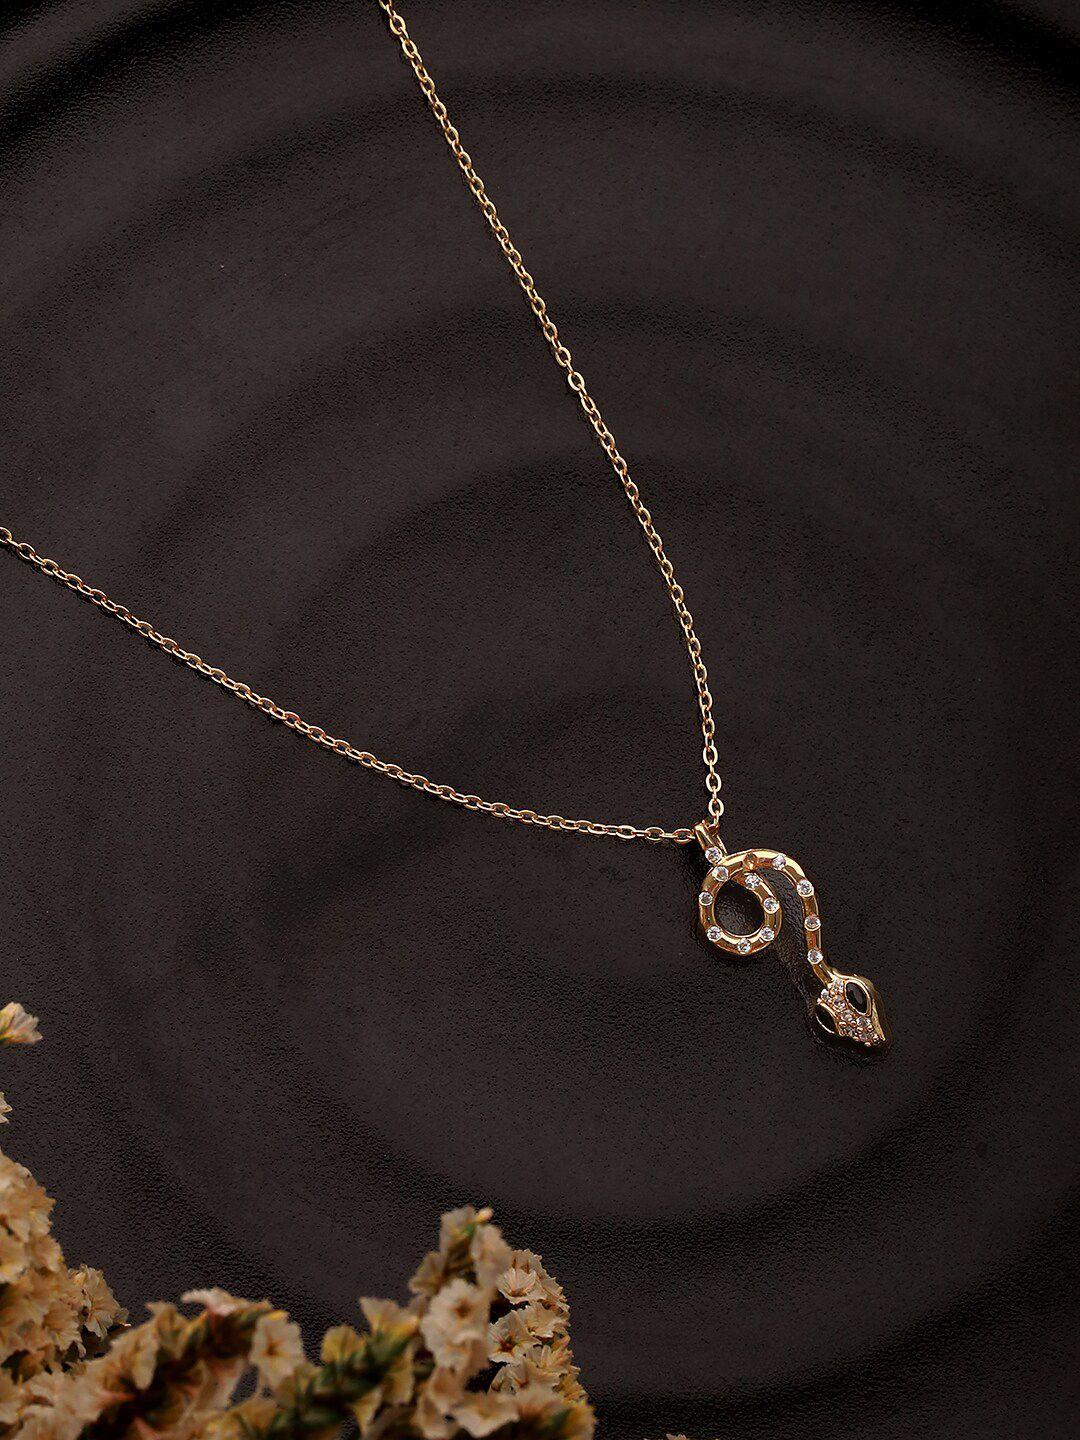 jazz and sizzle rose gold-plated cz studded snake pendant with chain